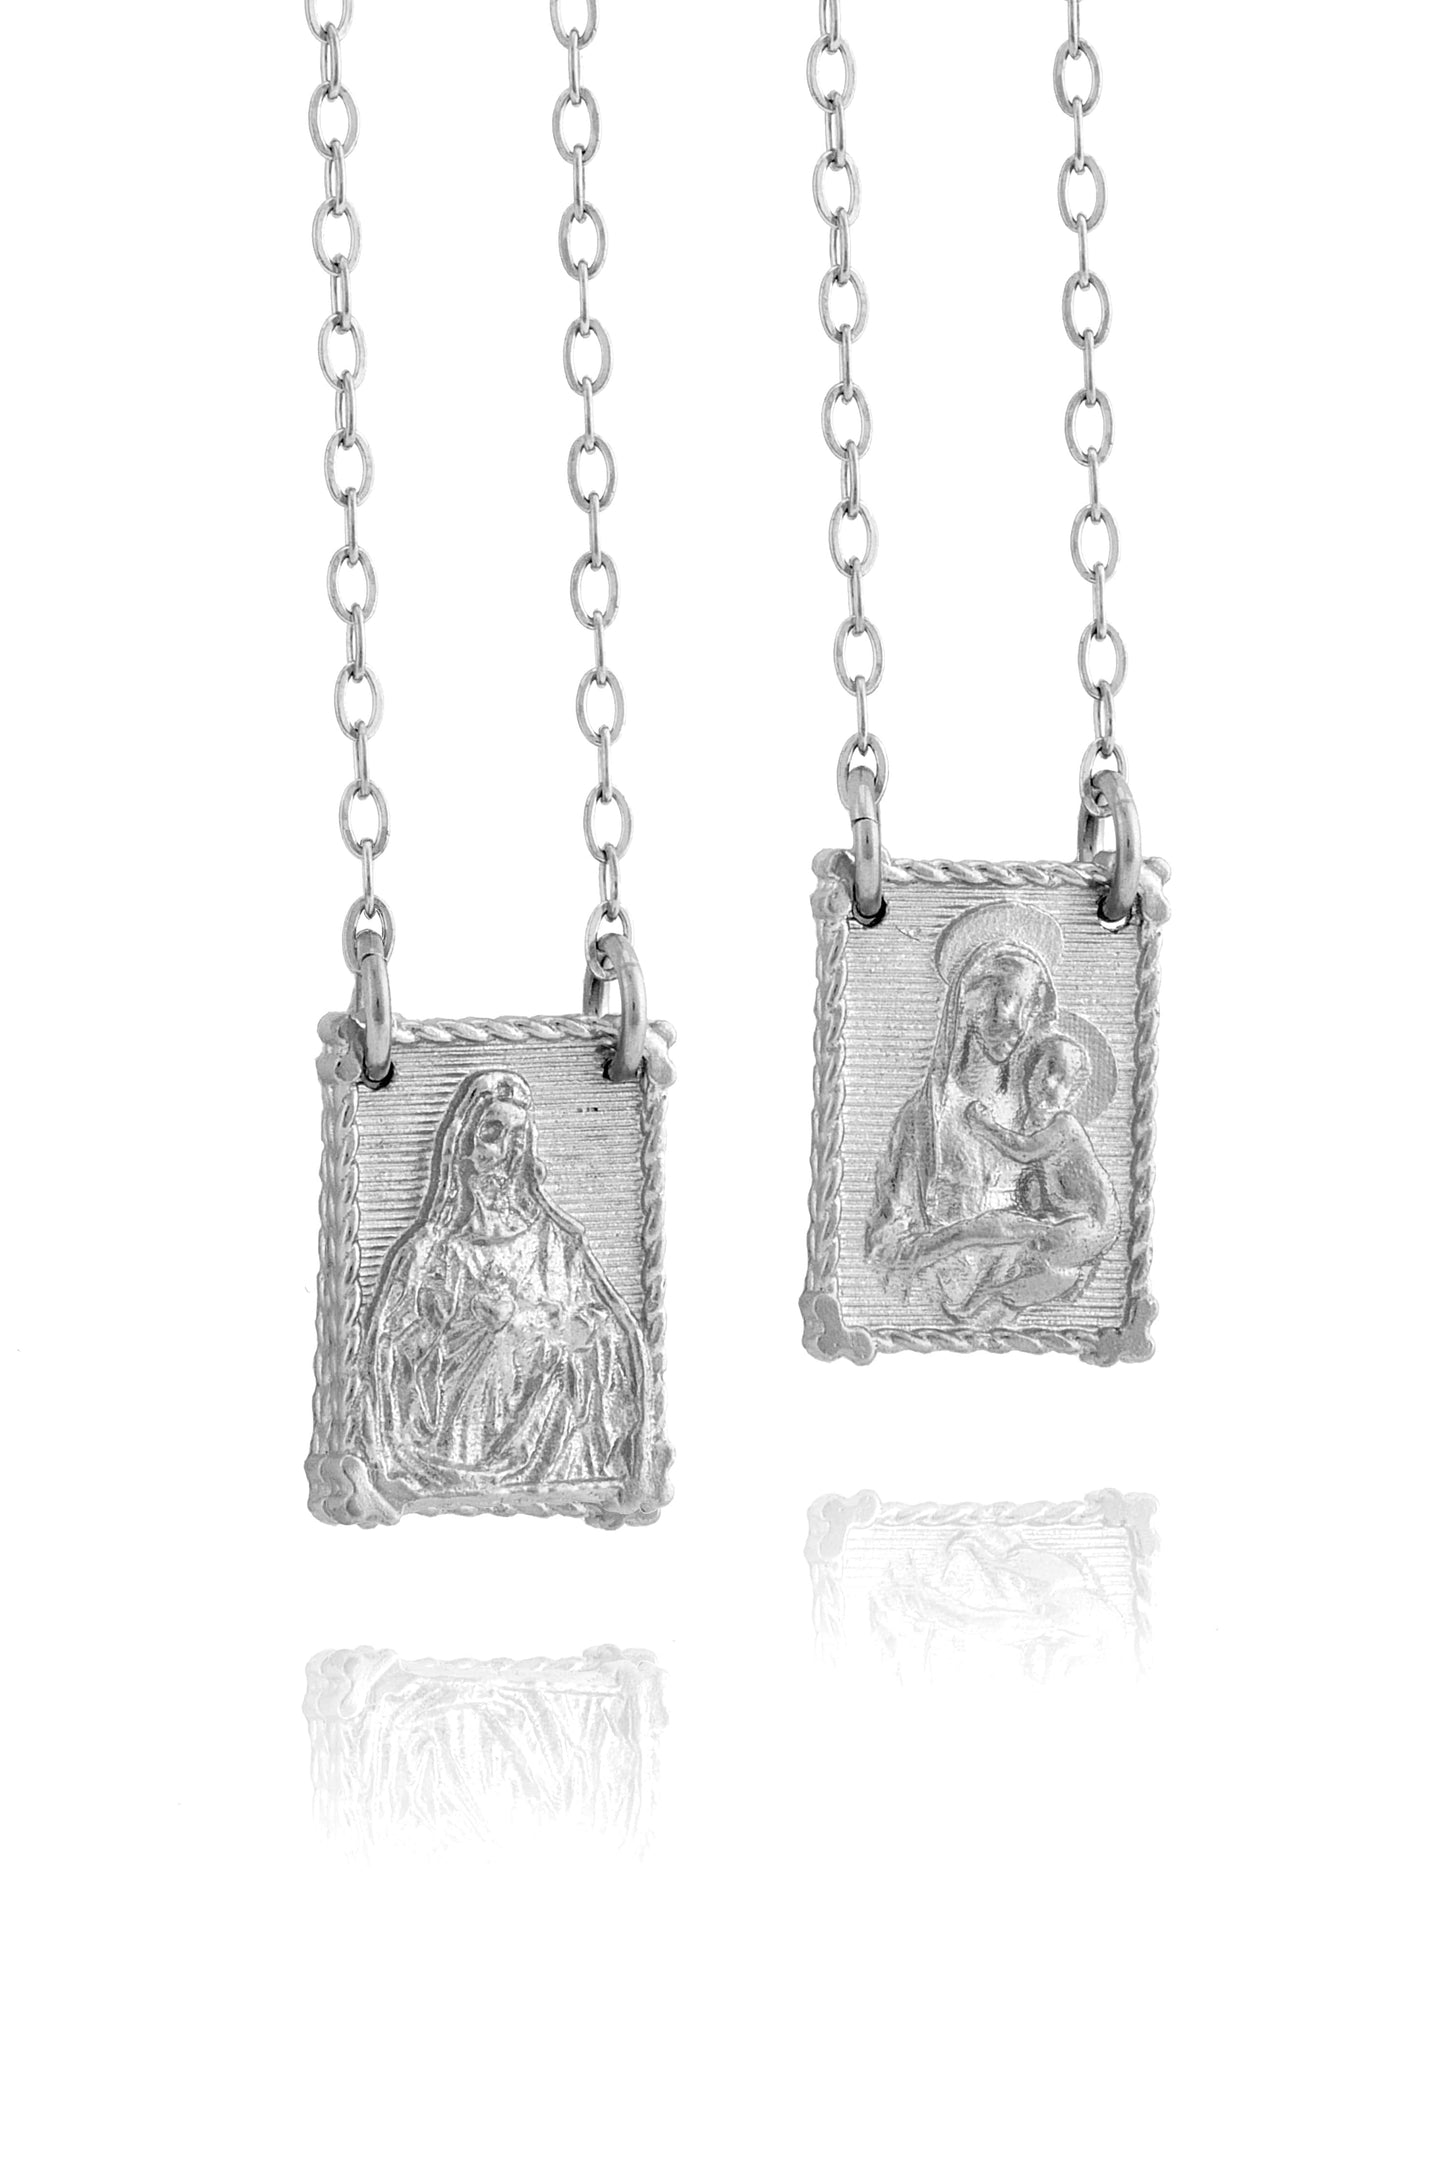 MONDO CATTOLICO Necklaces 11x15 mm (0.43x0.60 in) / Cm 70 (27.6 in) SCAPULAR STERLING SILVER 925 BLACK SILVER PLATED